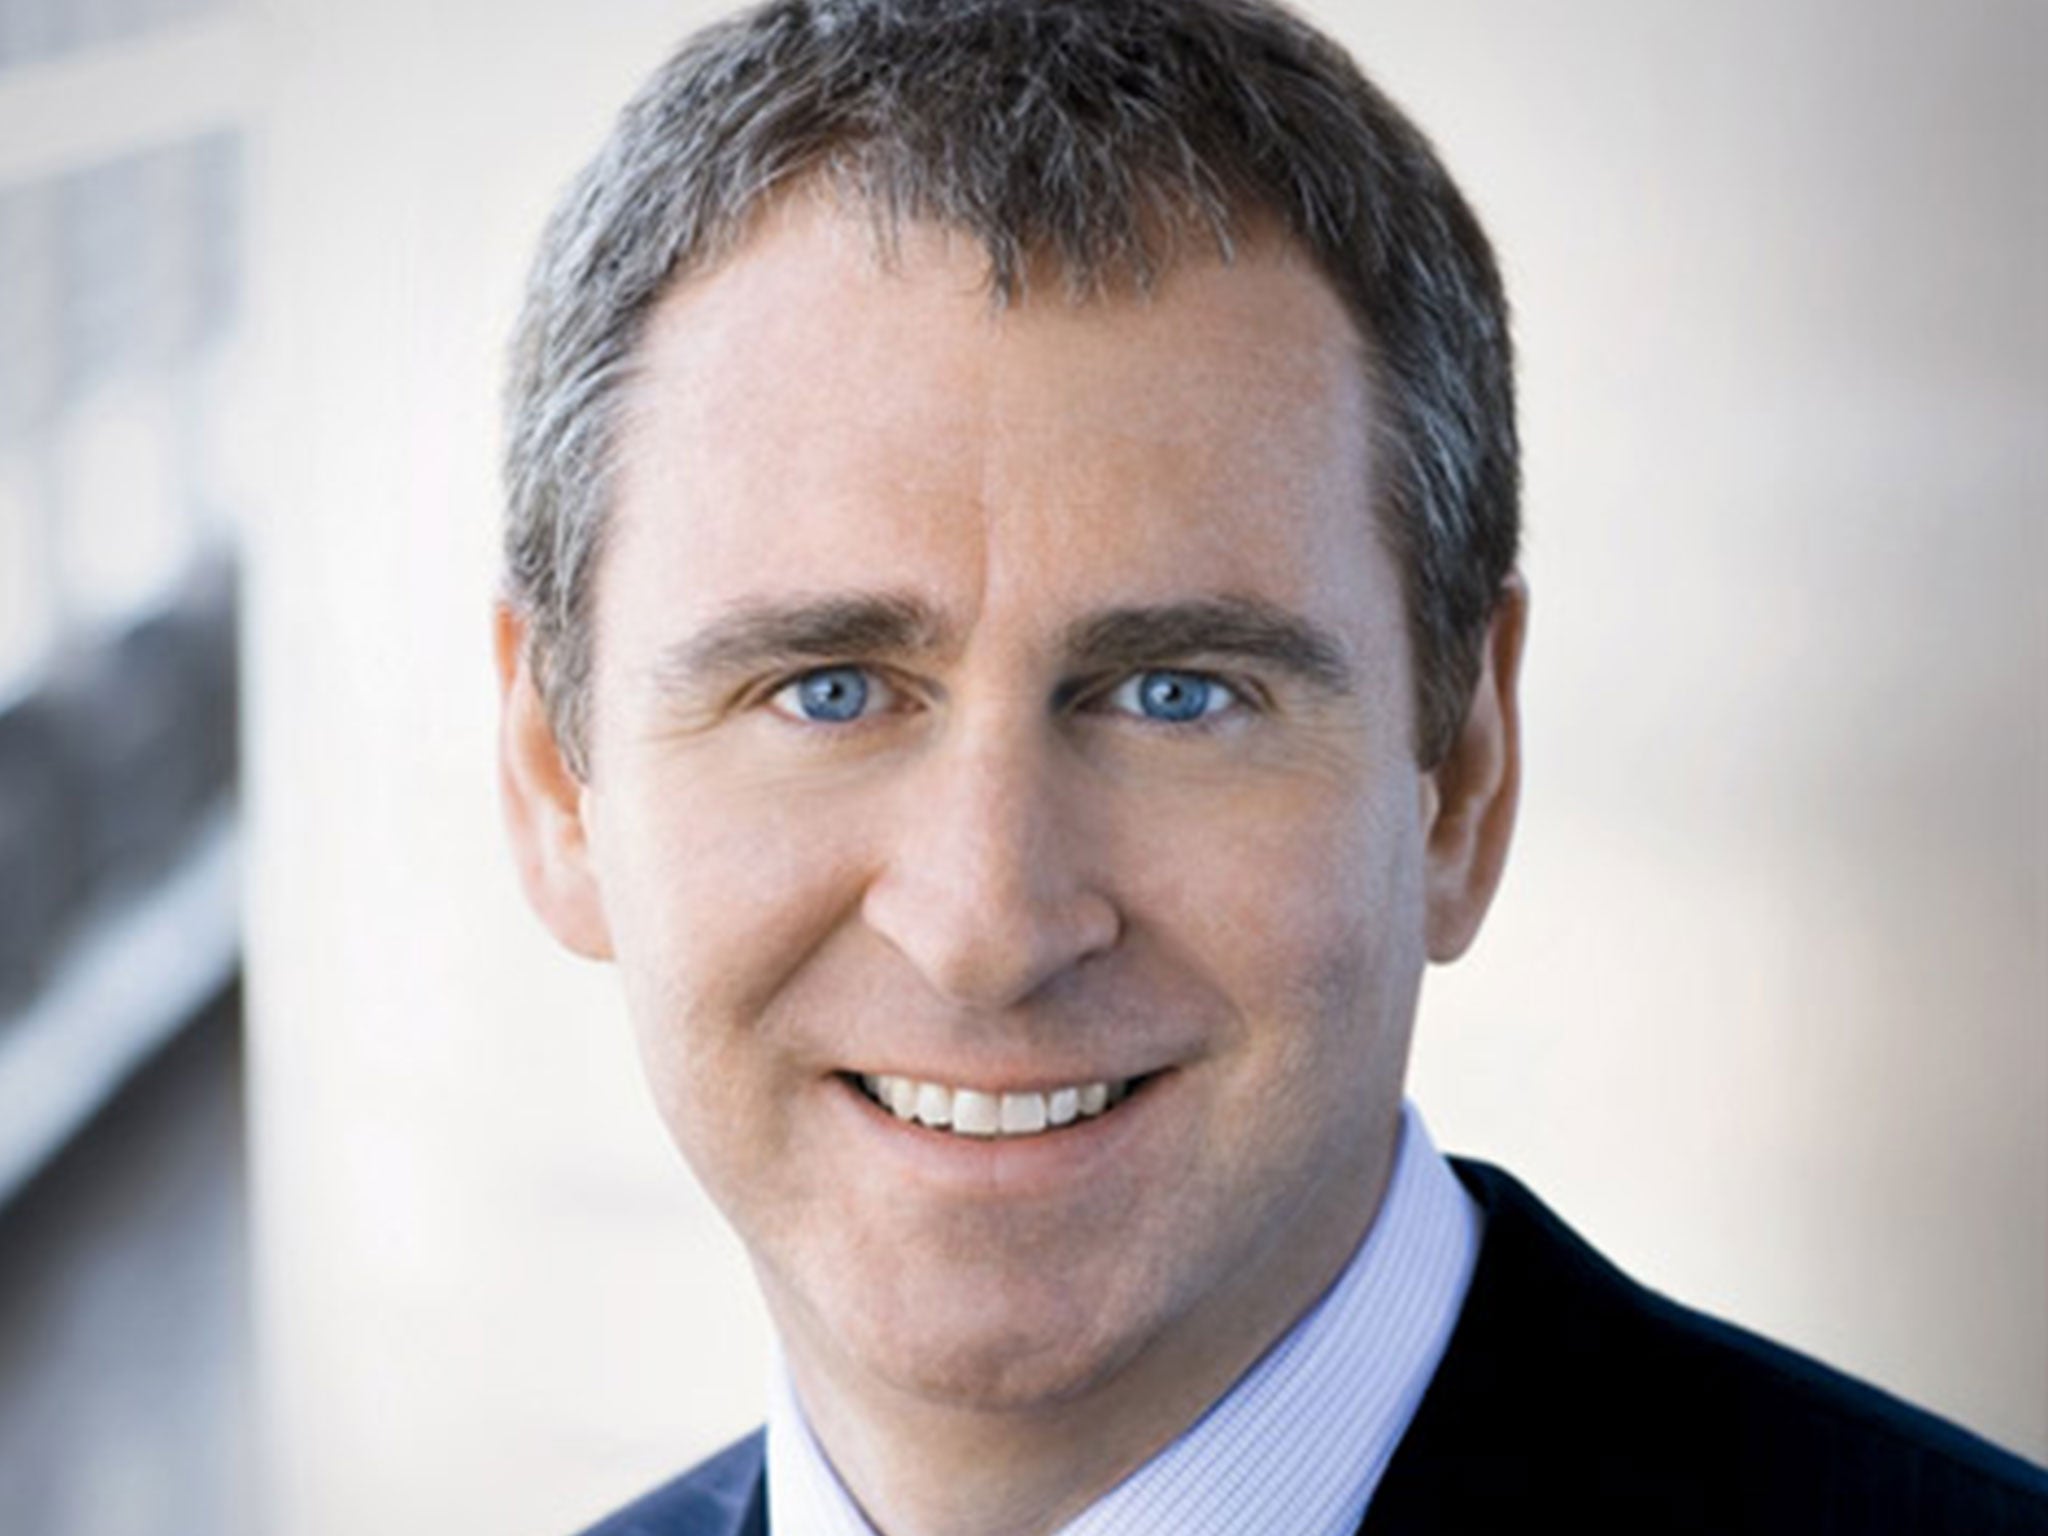 Ken Griffin, founder and CEO of investment firm Citadel